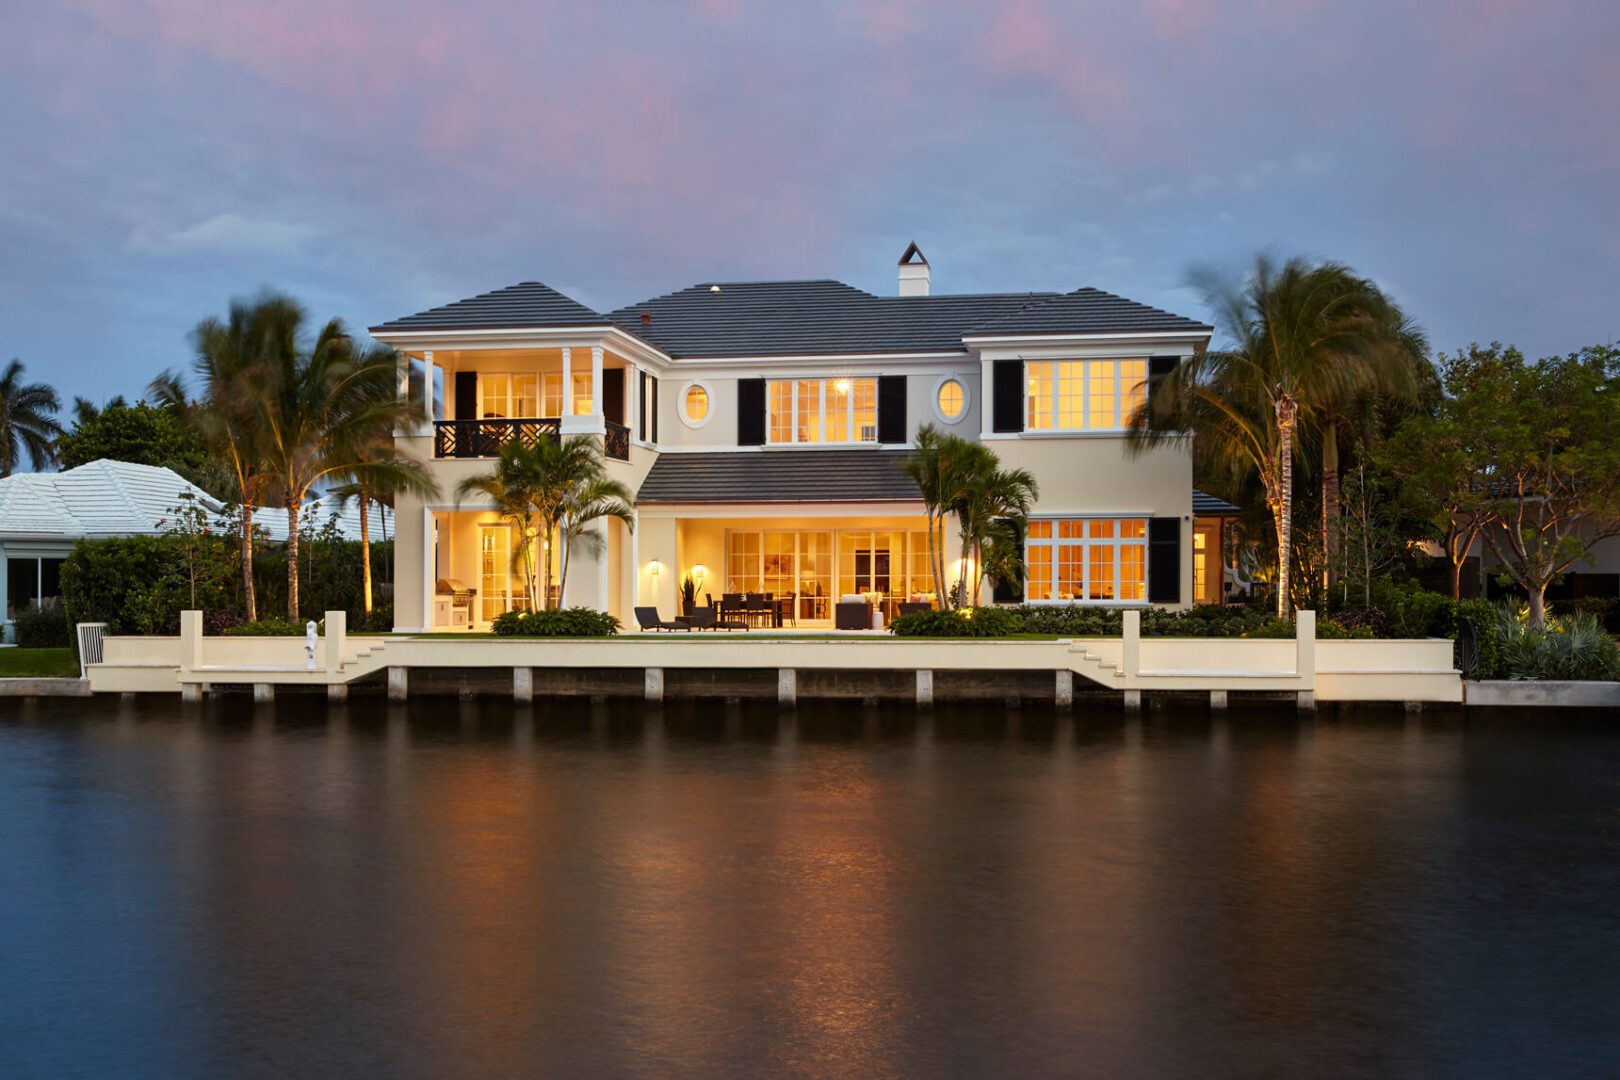 A large white house sitting on the water.